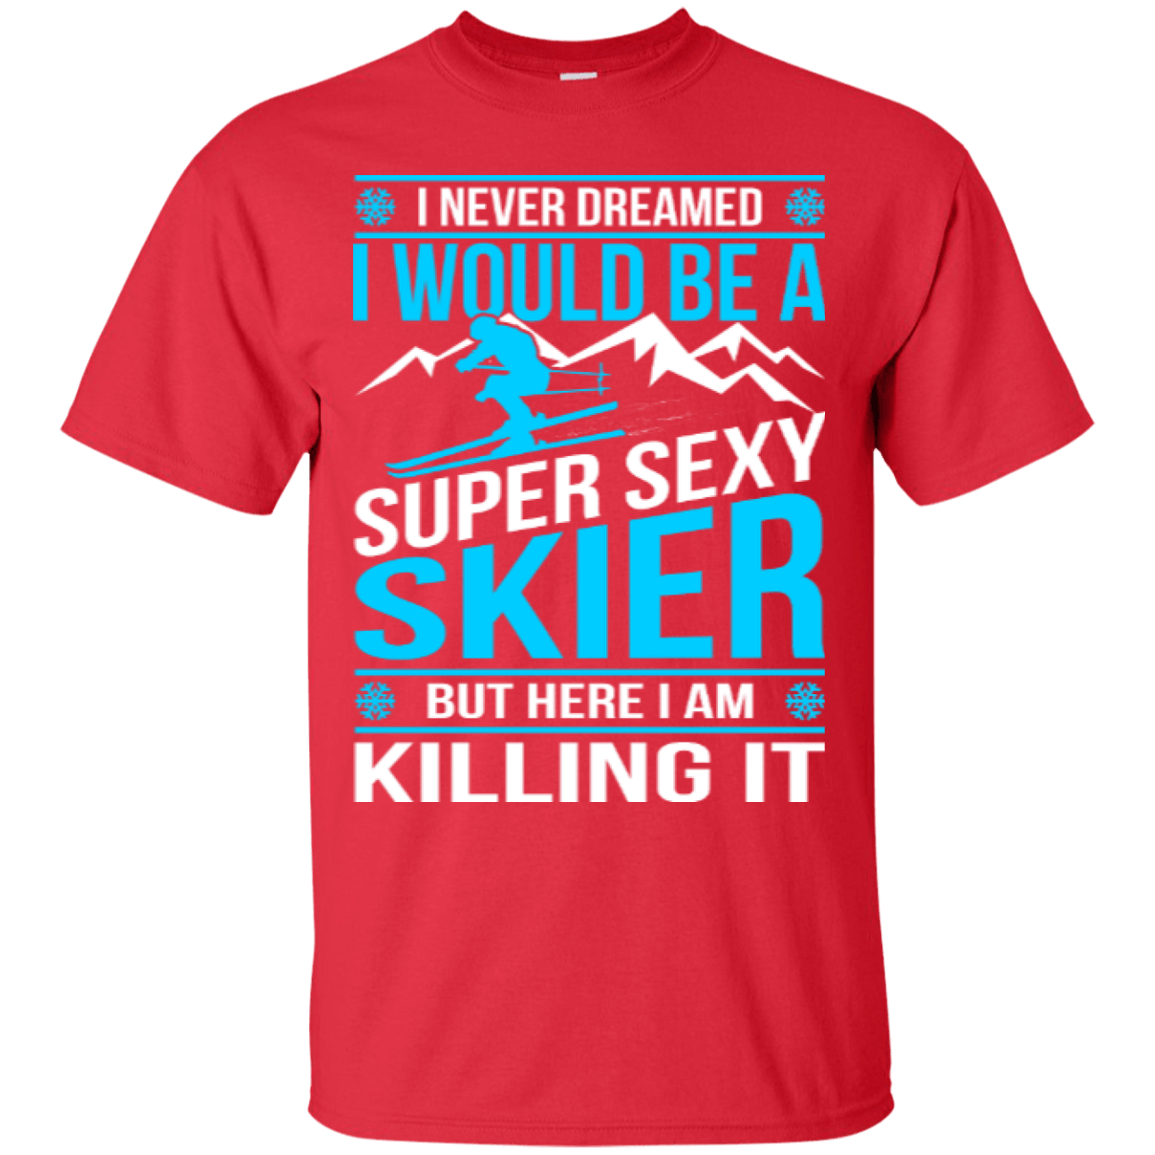 I Never Dreamed I Would Be A Super Sexy Skier But Here I Am Killing It Tees - Powderaddicts